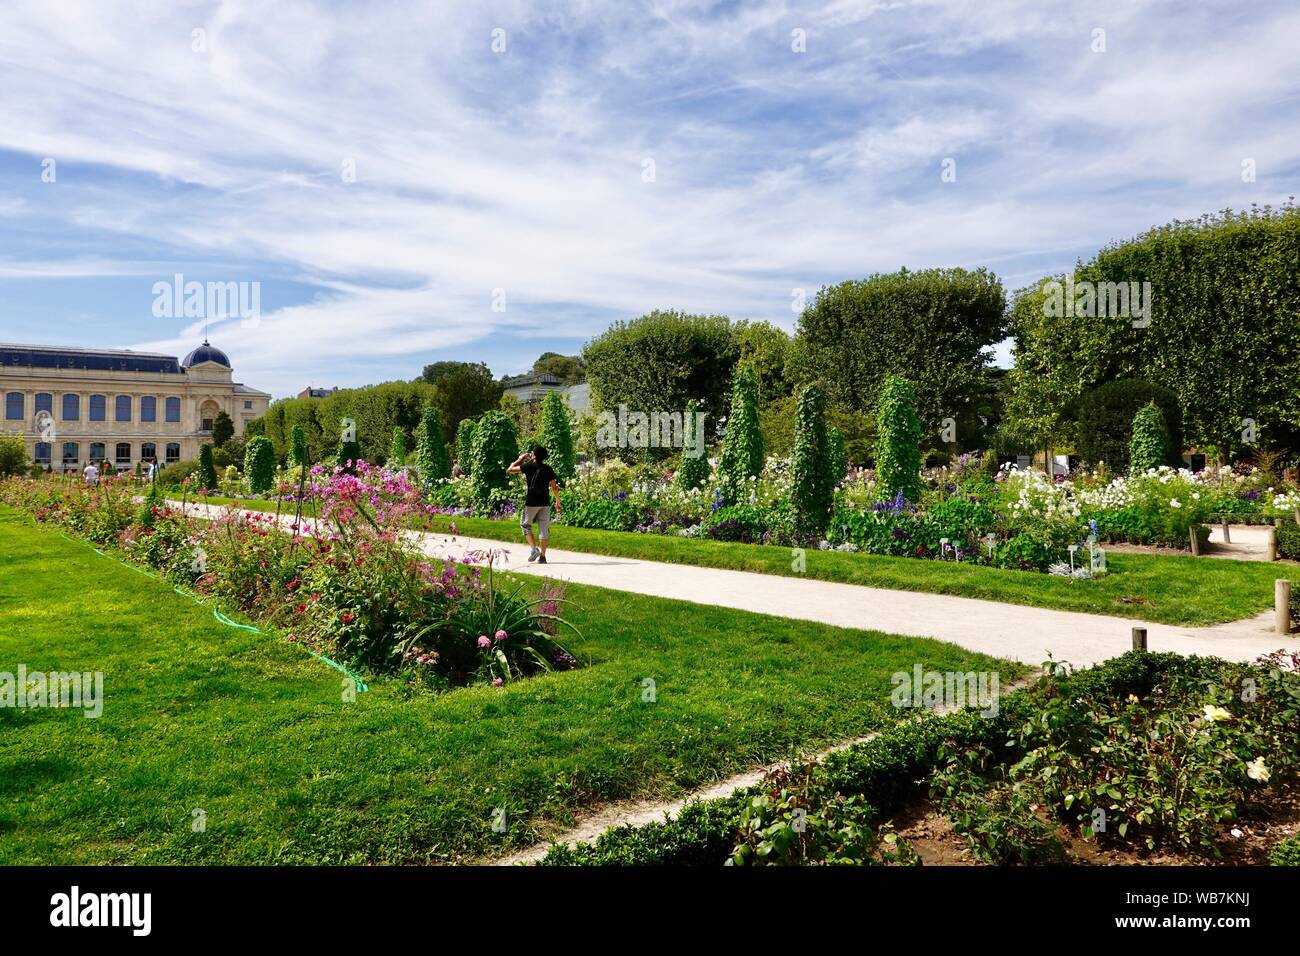 People enjoying bright, summer flowers in the gardens of the Jardin des Plantes, Muséum National d'Histoire Naturelle in the background, Paris, France Stock Photo